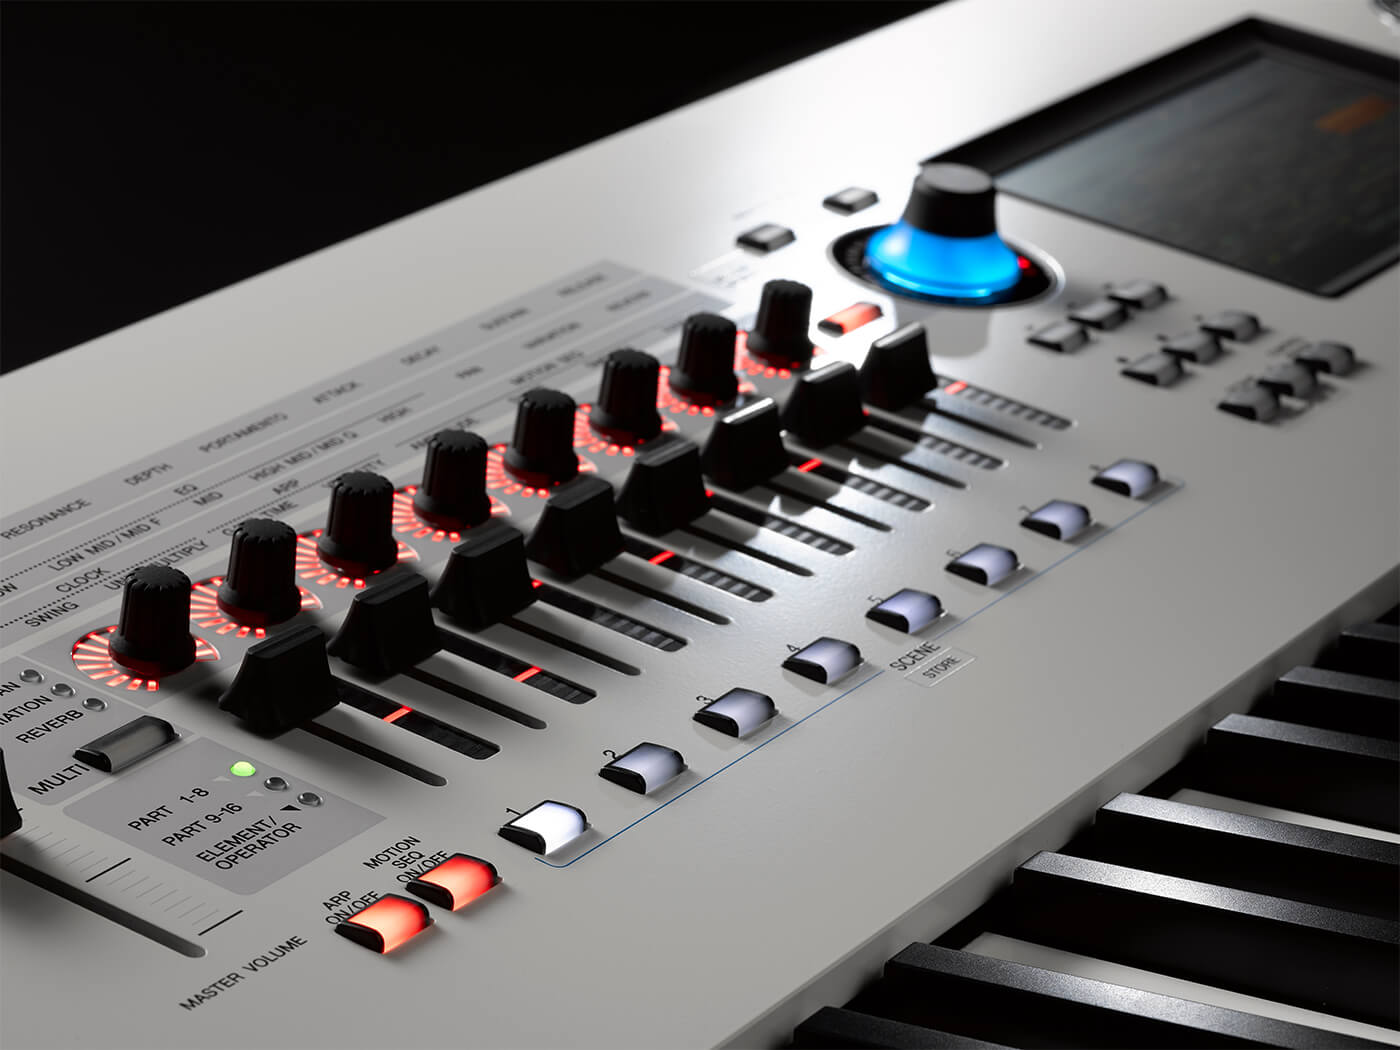 Yamaha celebrates 45 years of synthesisers, updating Montage with a new white finish